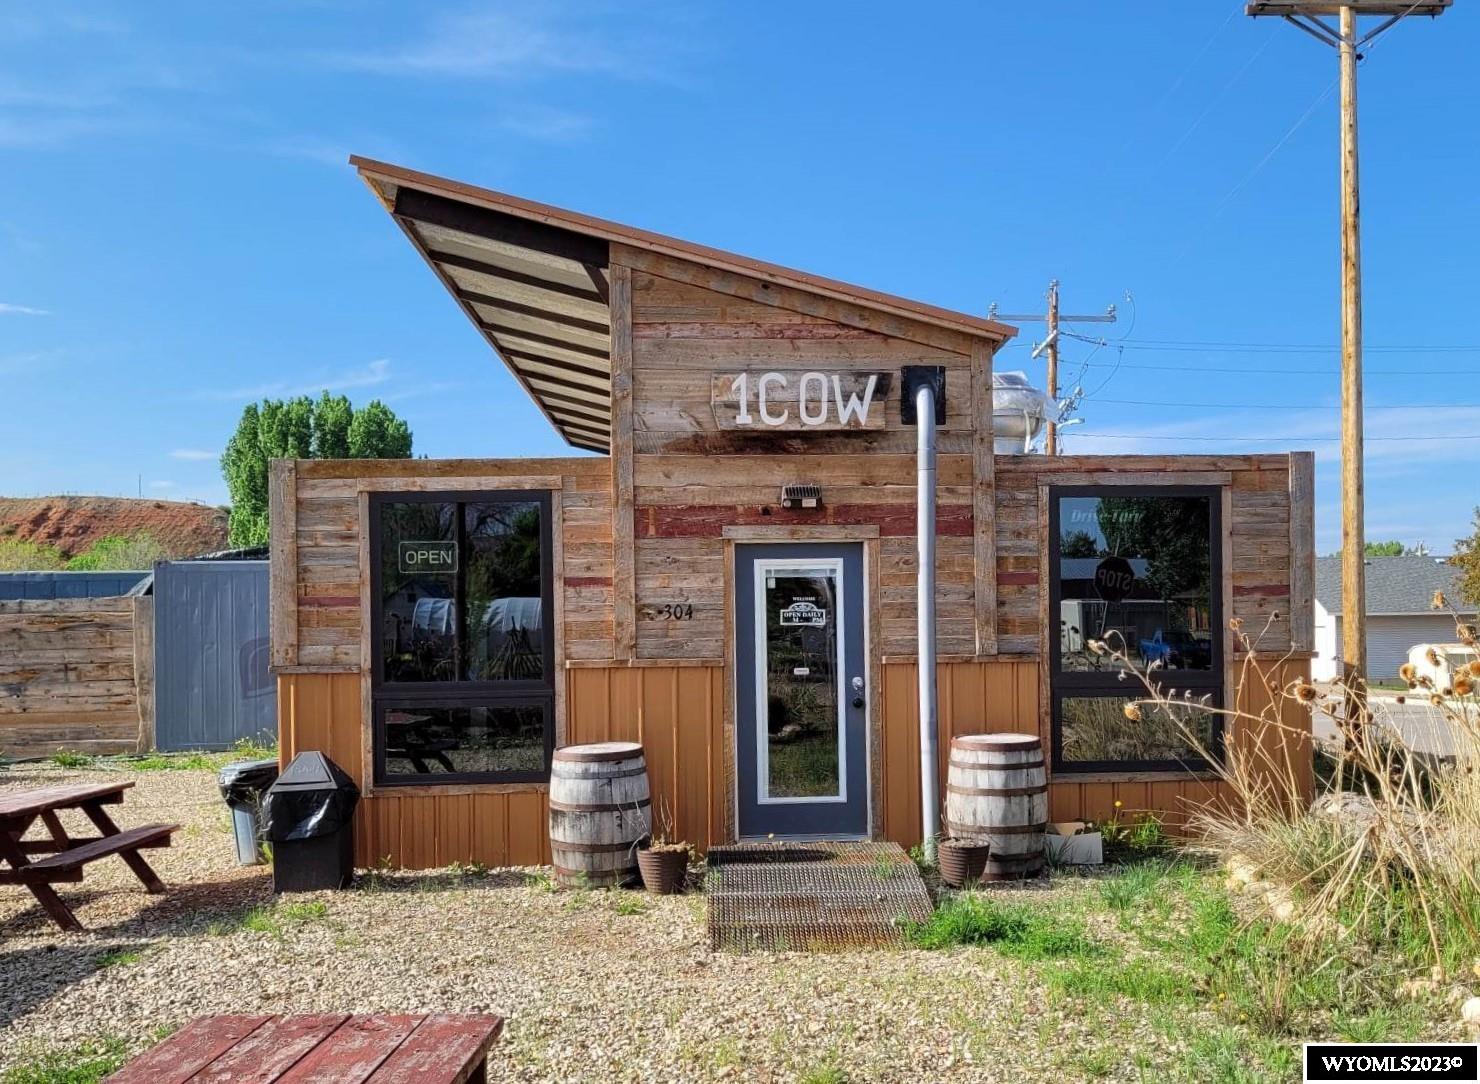 Business Opportunity!! Location is business and this one is ideal for a lot of it! Located in the heart of Ten Sleep Wyo. 1.8 acres with established restaurant business. Equipped with nearly everything you'll need. 200amp 480v service and 600amp 120/240 service on site. Existing 300sq ft of refrigerated or freezer space. Inside and outside seating, drive-up, & off-street parking. Grill, firers, grease trap, coolers and much more! This building is a certified state inspected butcher shop, certified through 12/31/23. It is also setup to be a bakery.  Retail opportunity and Highway access at the foot of the Big Horn Mountains, roughly half way between the Black Hills & Yellowstone Park. Many possibilities and potential for your business ideas, not just the food industry. Come take look!